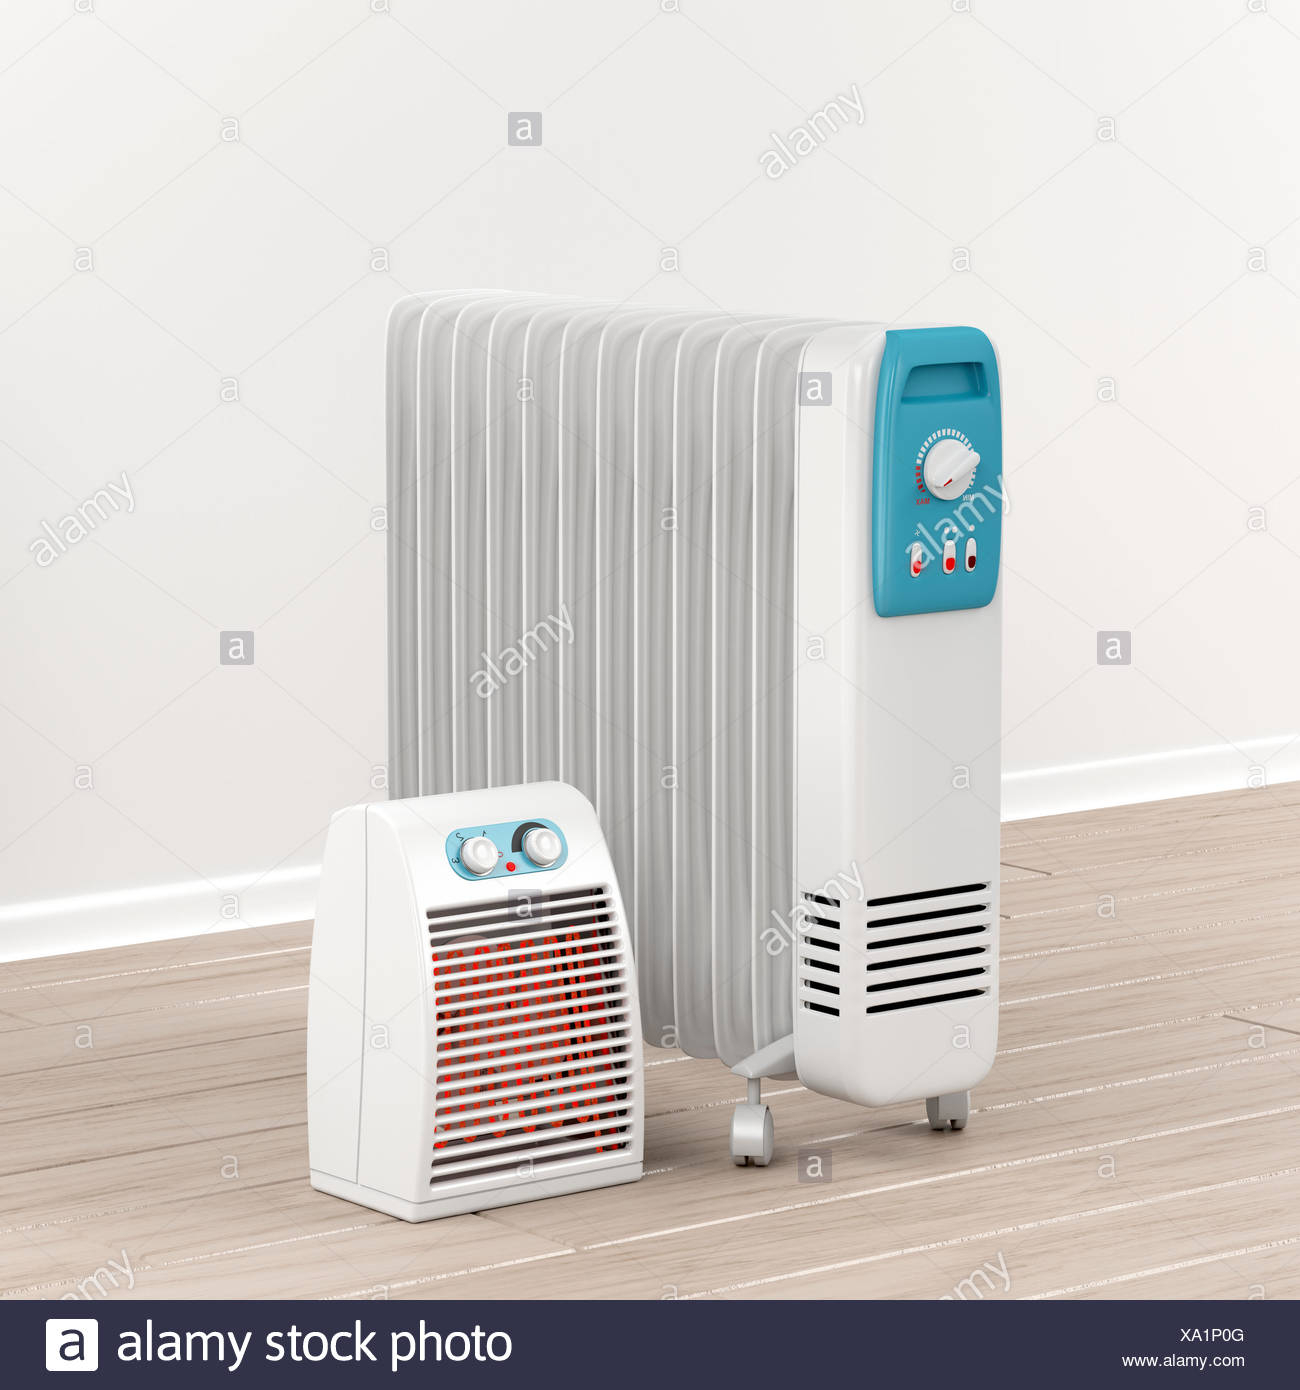 Oil Filled Radiator And Fan Heater Stock Photo 281551664 for size 1300 X 1390